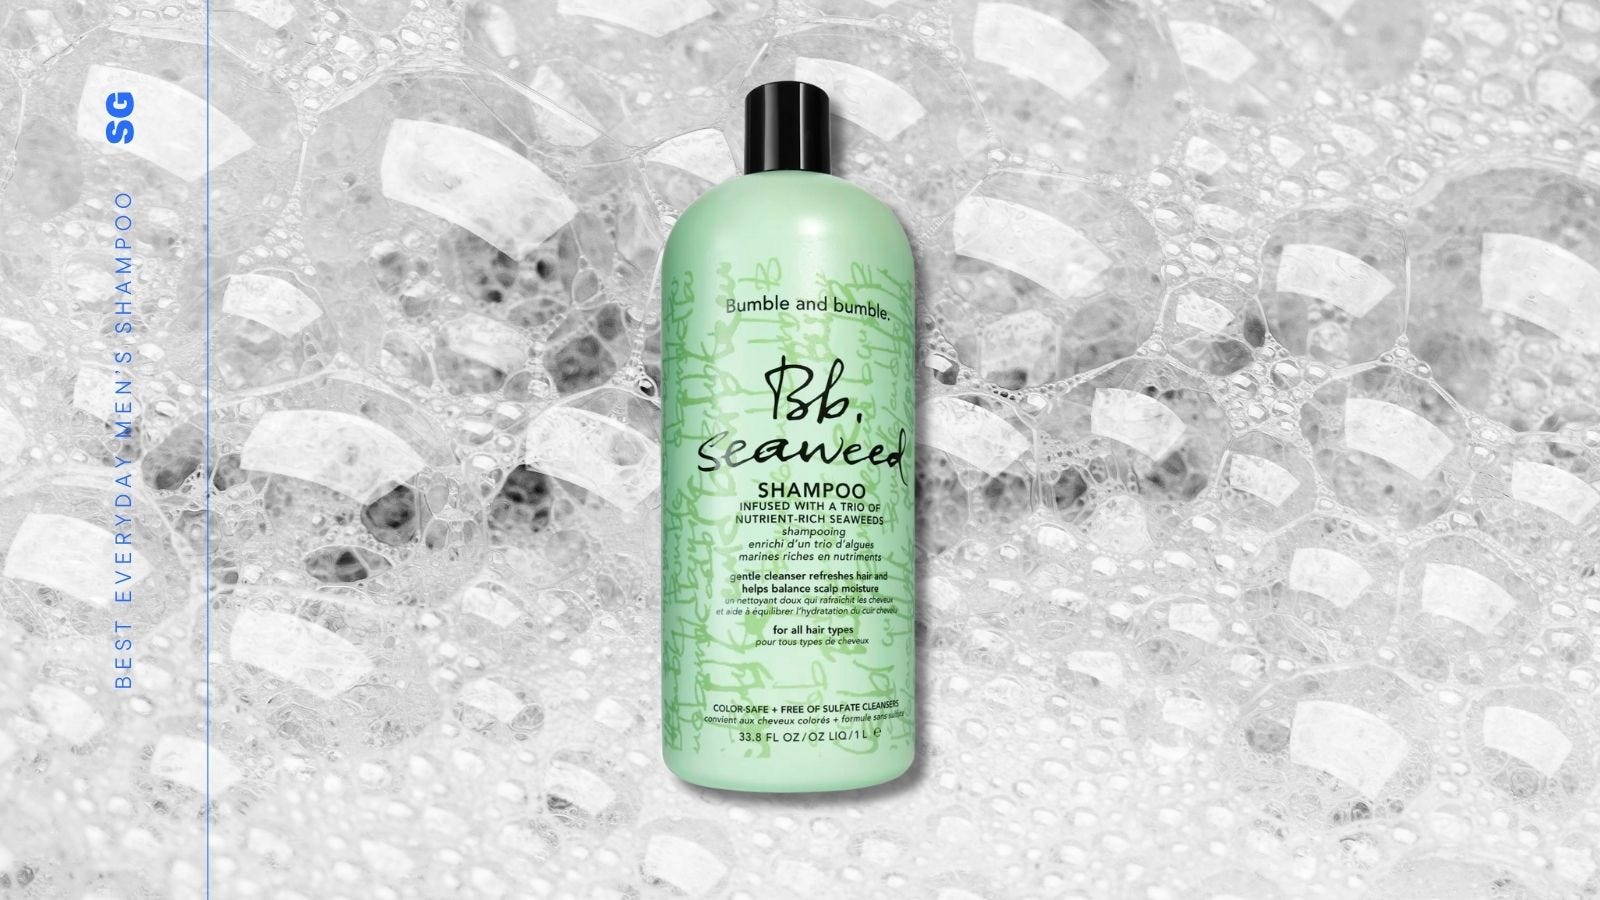 bottle of shampoo in a green container with a black top, set against a background of soapy bubbles. text on-screen reads: best everyday men's shampoo